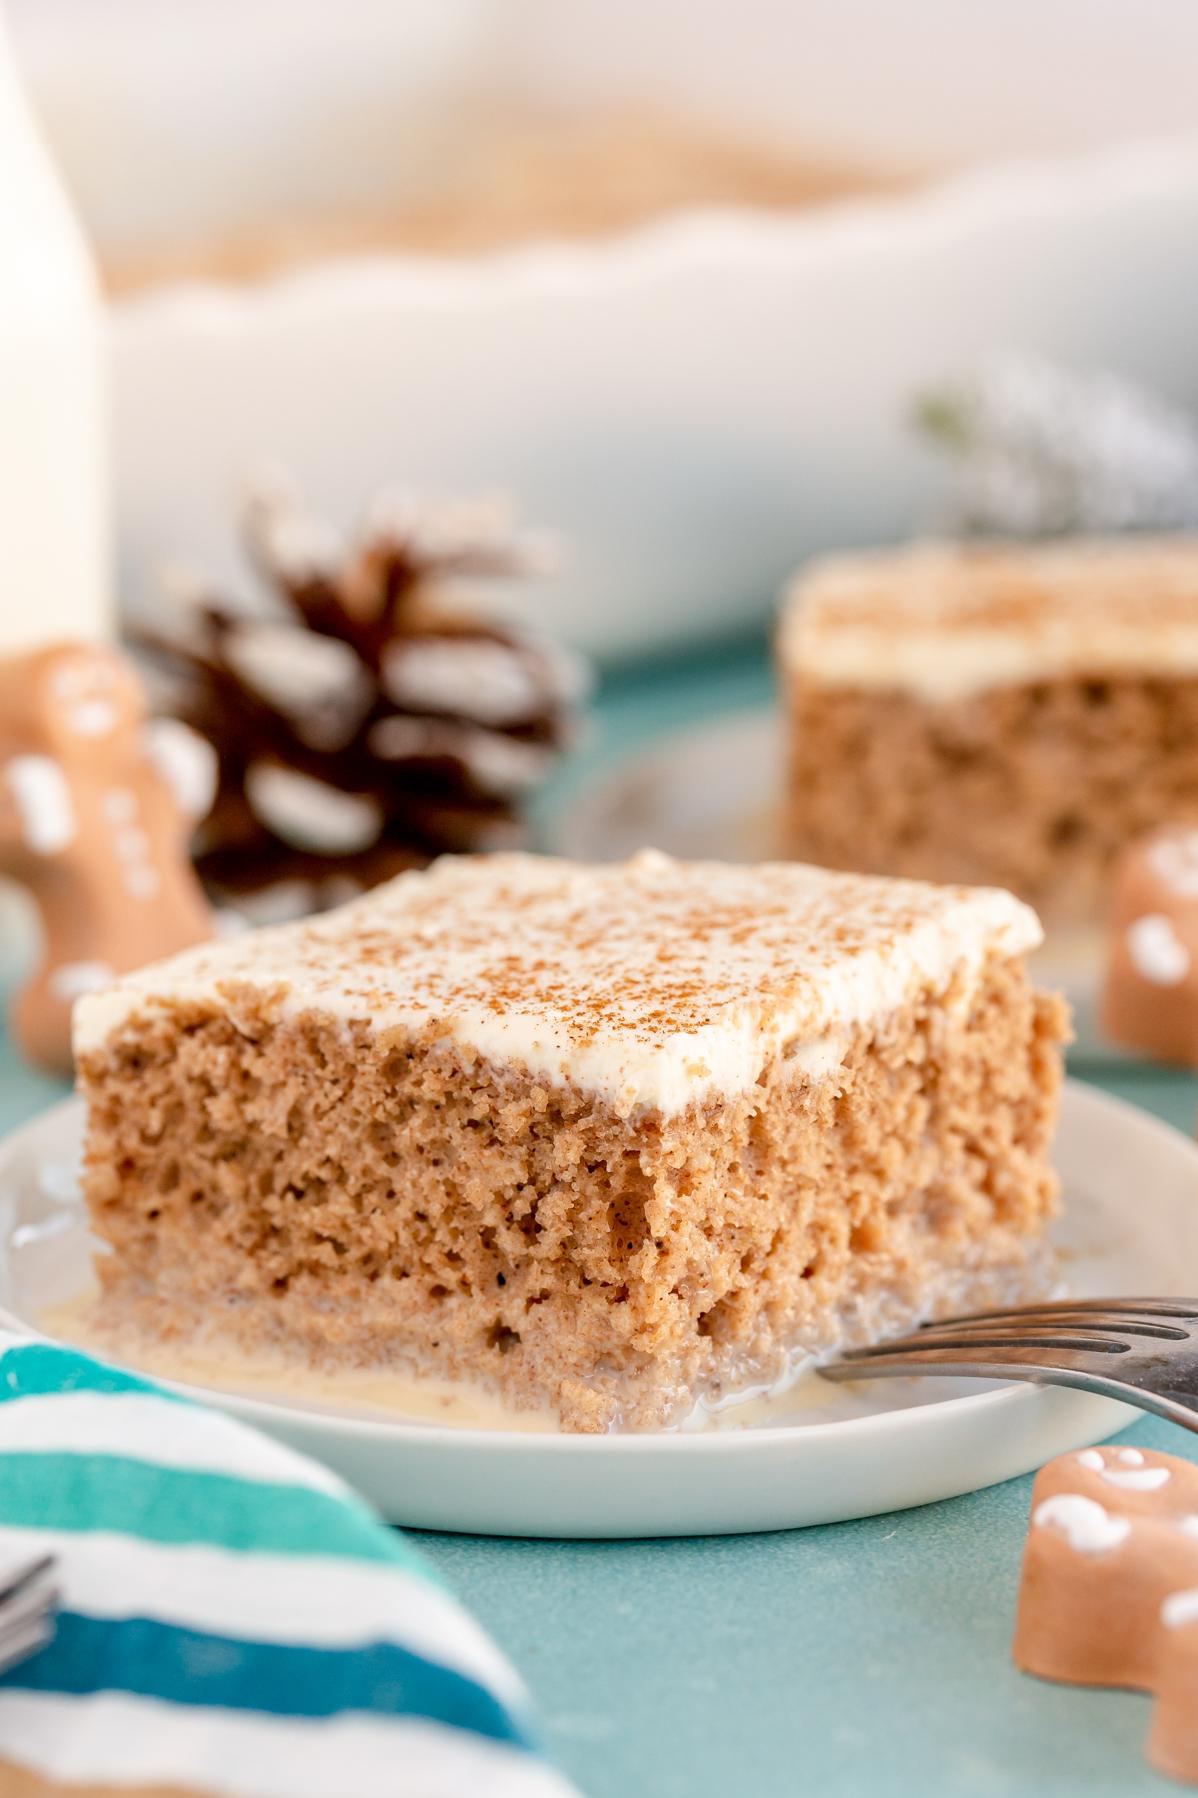  This cake is the perfect dessert to impress your holiday guests